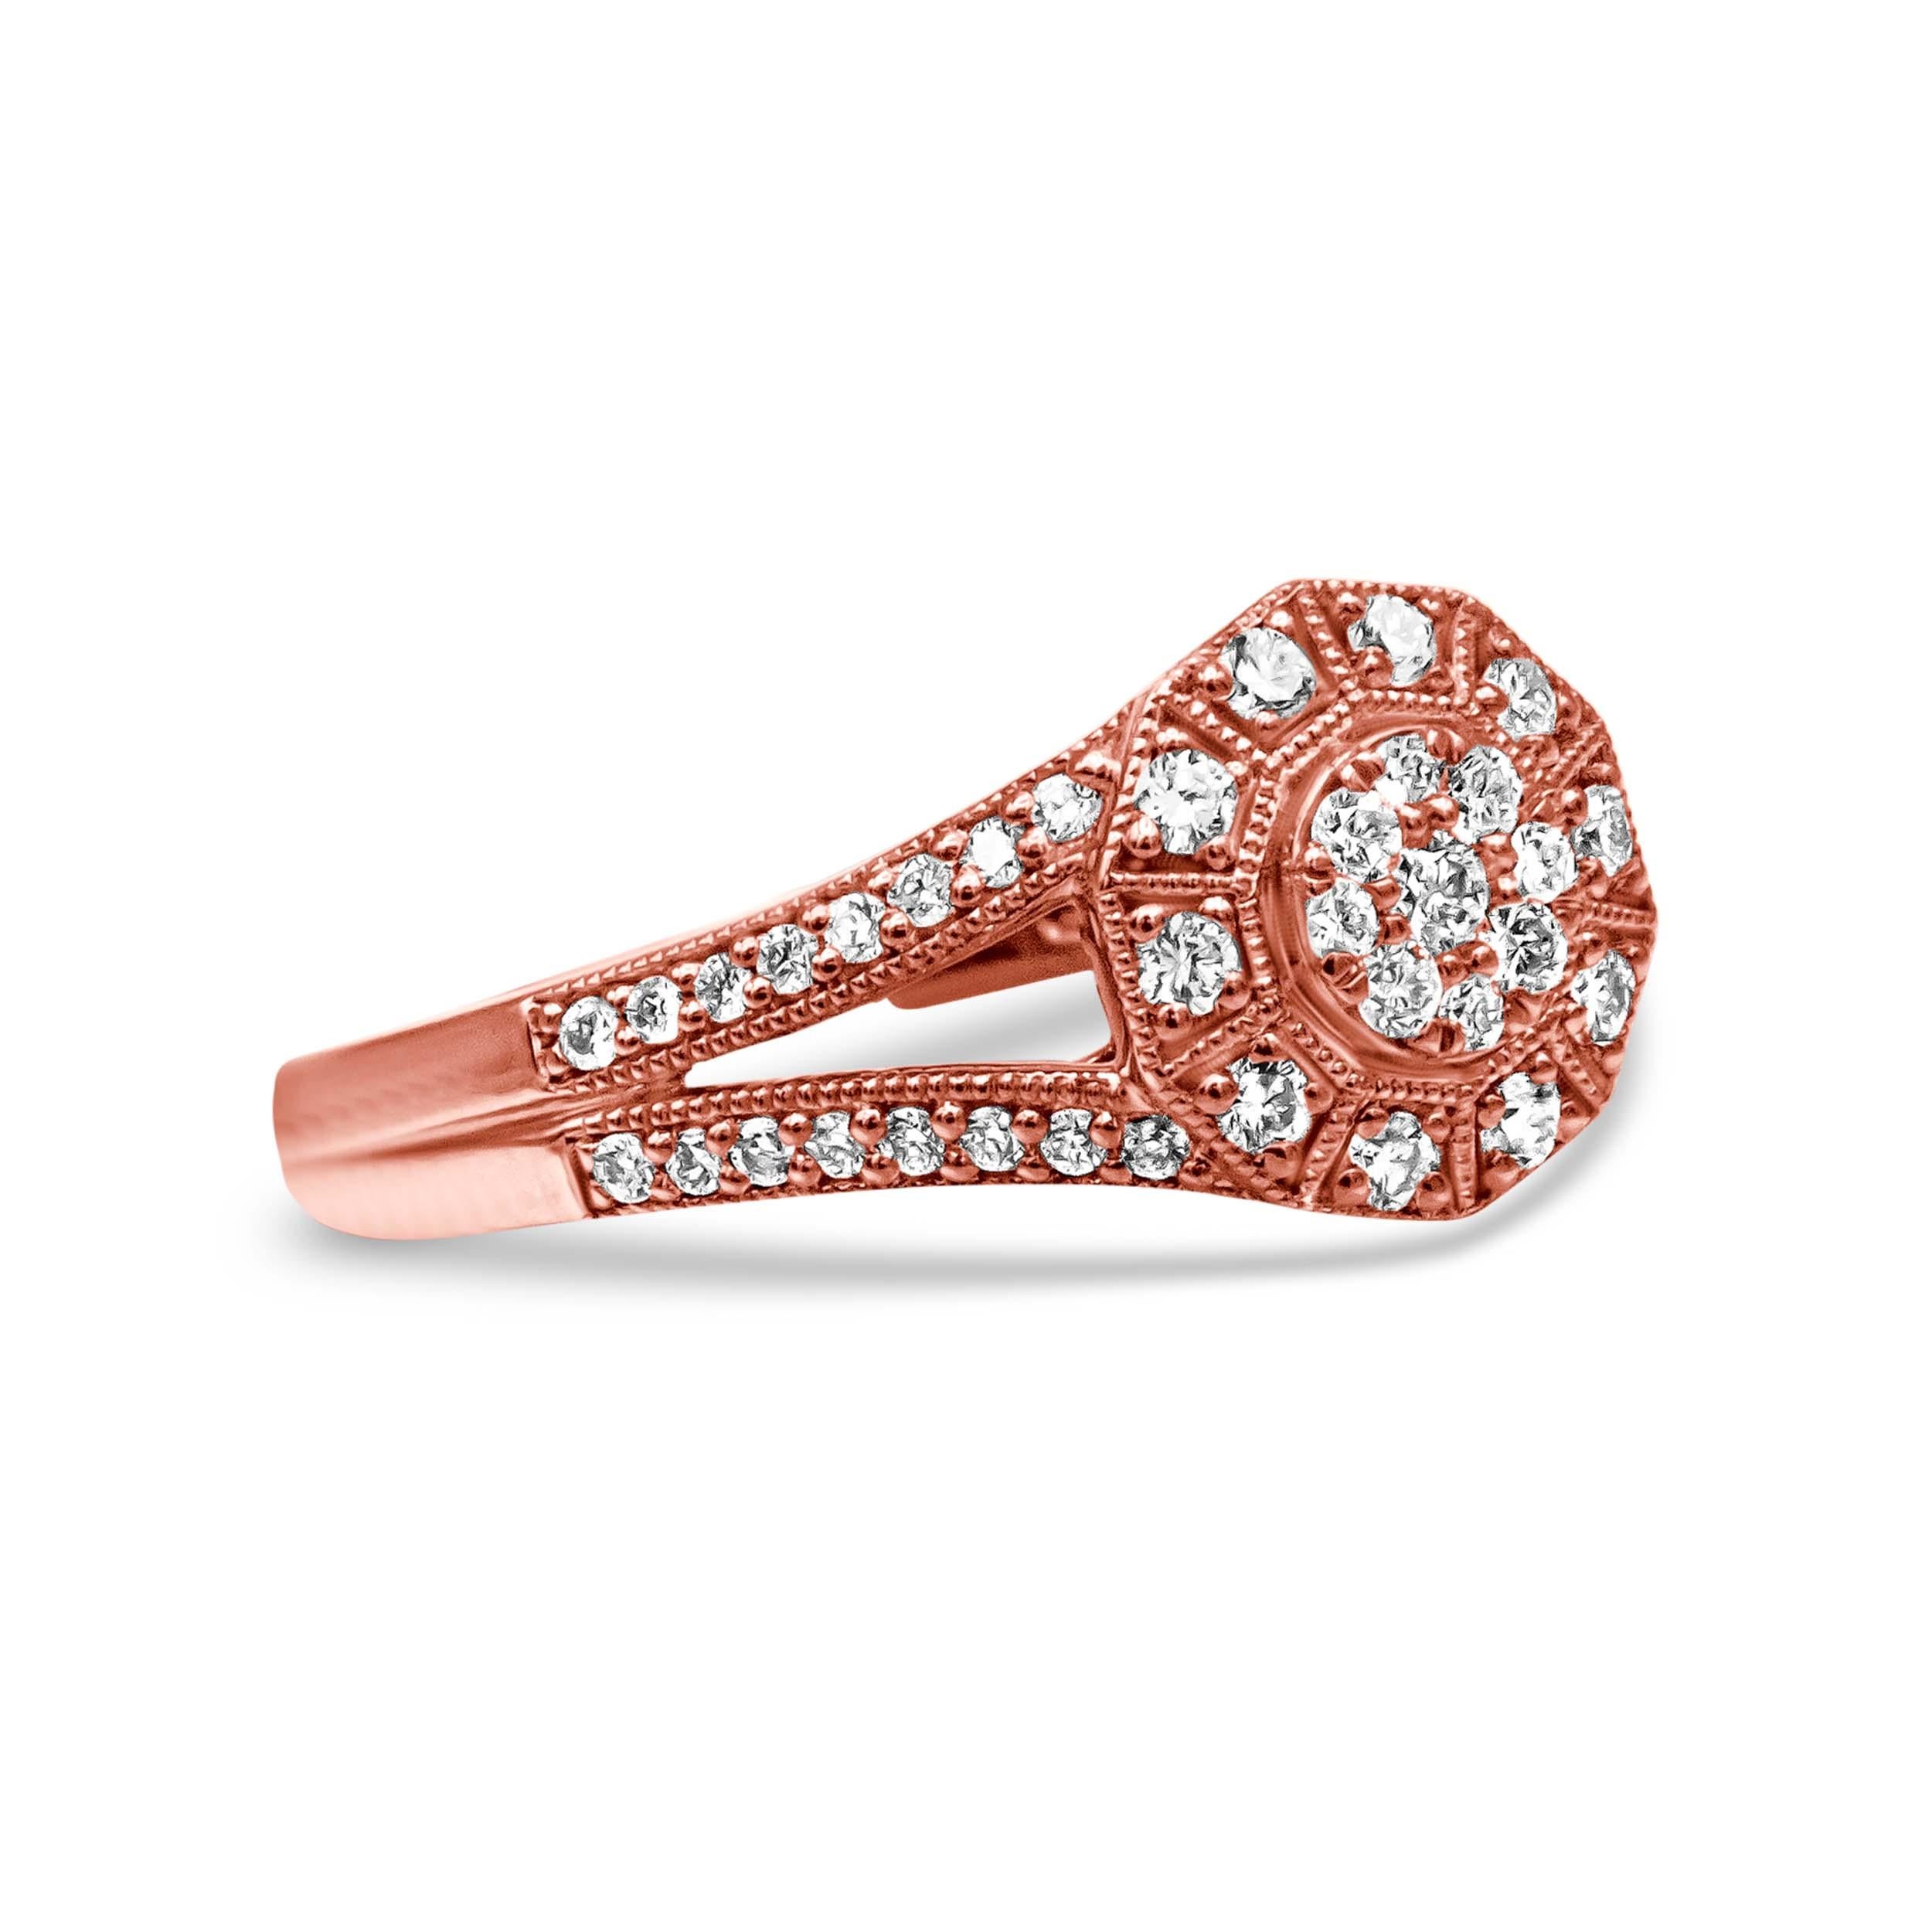 This devastatingly gorgeous cocktail ring brings on the charm with a gorgeous breadth of round, pave-set diamonds. A center cluster of diamonds gives a floral inspired beauty, haloed by a sparkling set of round diamond that adds an intricate sense